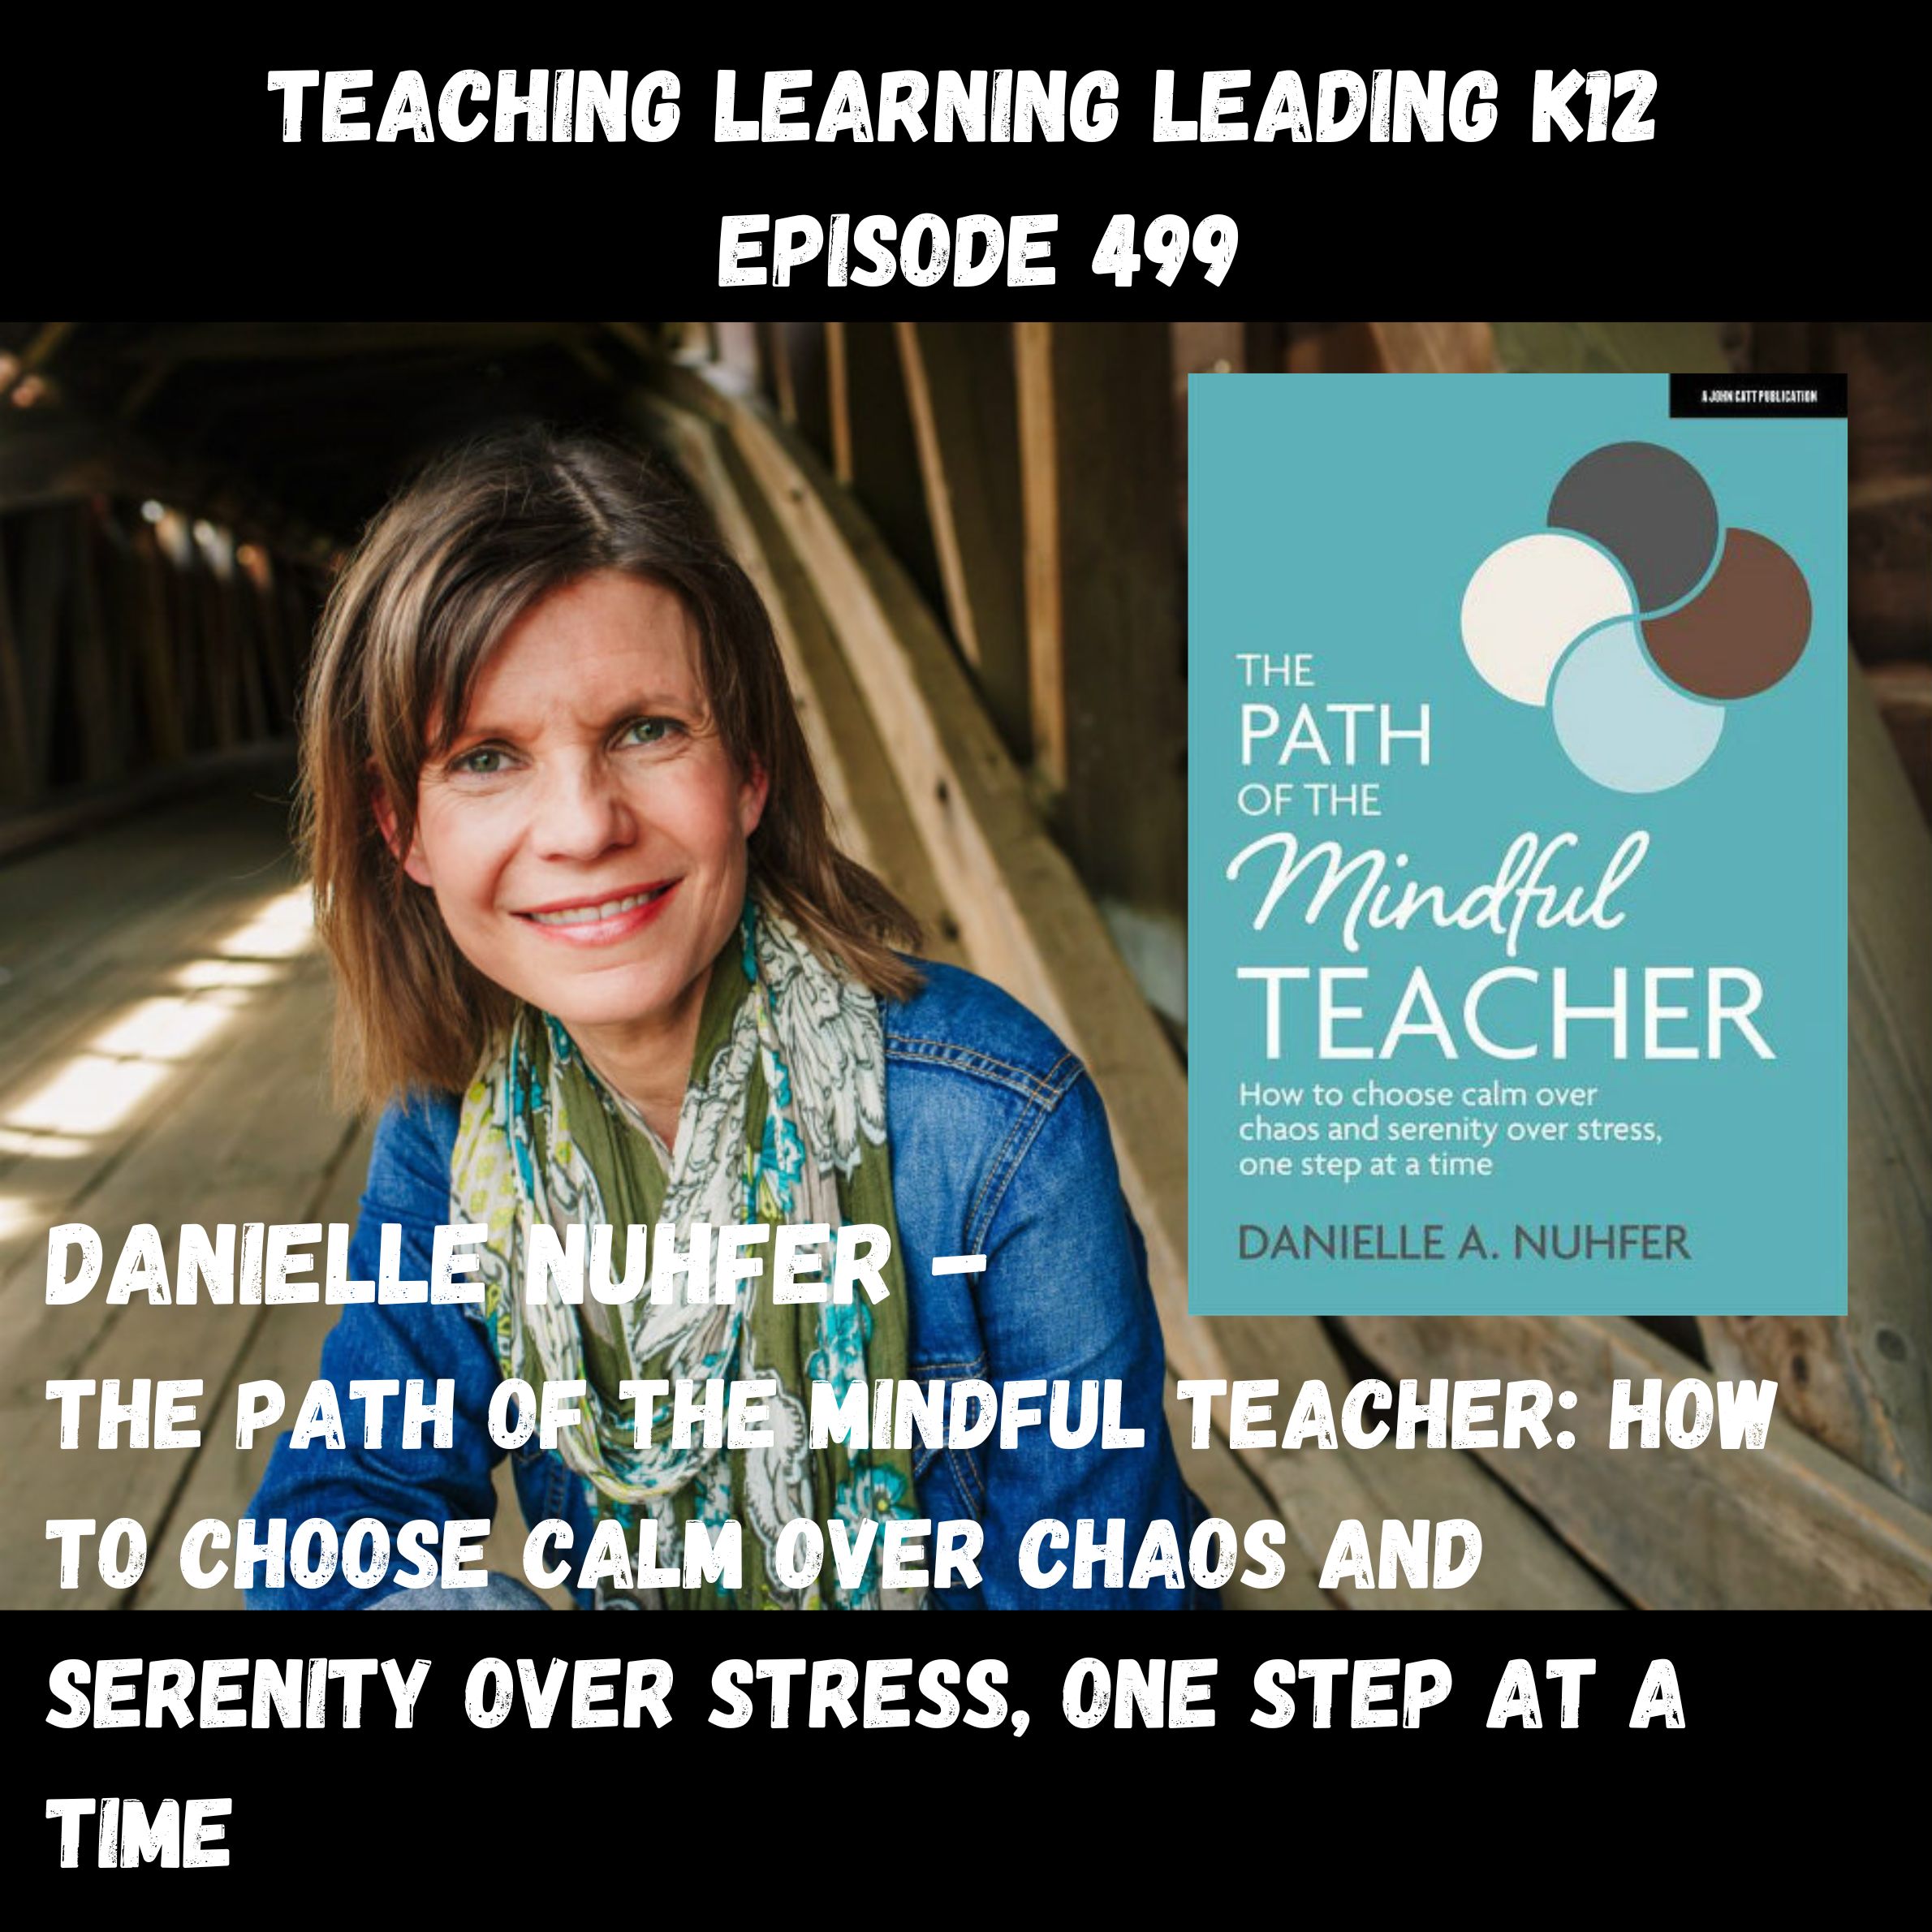 Episode image for Danielle Nuhfer - The Path of the Mindful Teacher: How to Choose Calm Over Chaos and Serenity Over Stress, One Step at a Time - 499